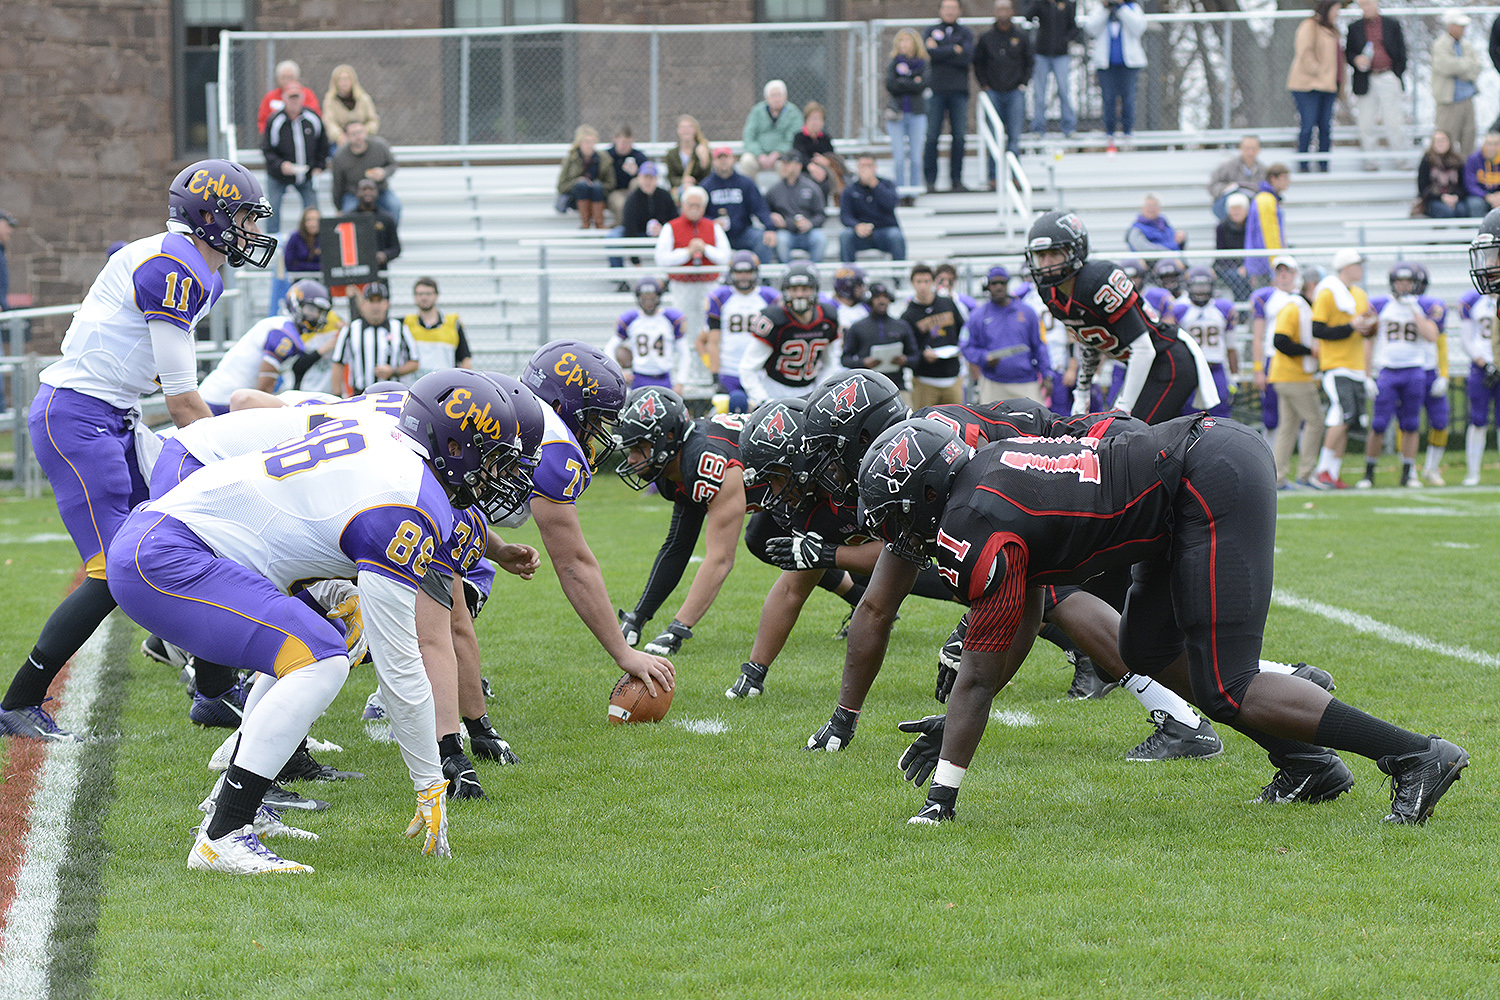 Wesleyan's football team took on Williams College for the annual Homecoming game on Saturday, Nov. 7. (Photo by John Van Vlack)